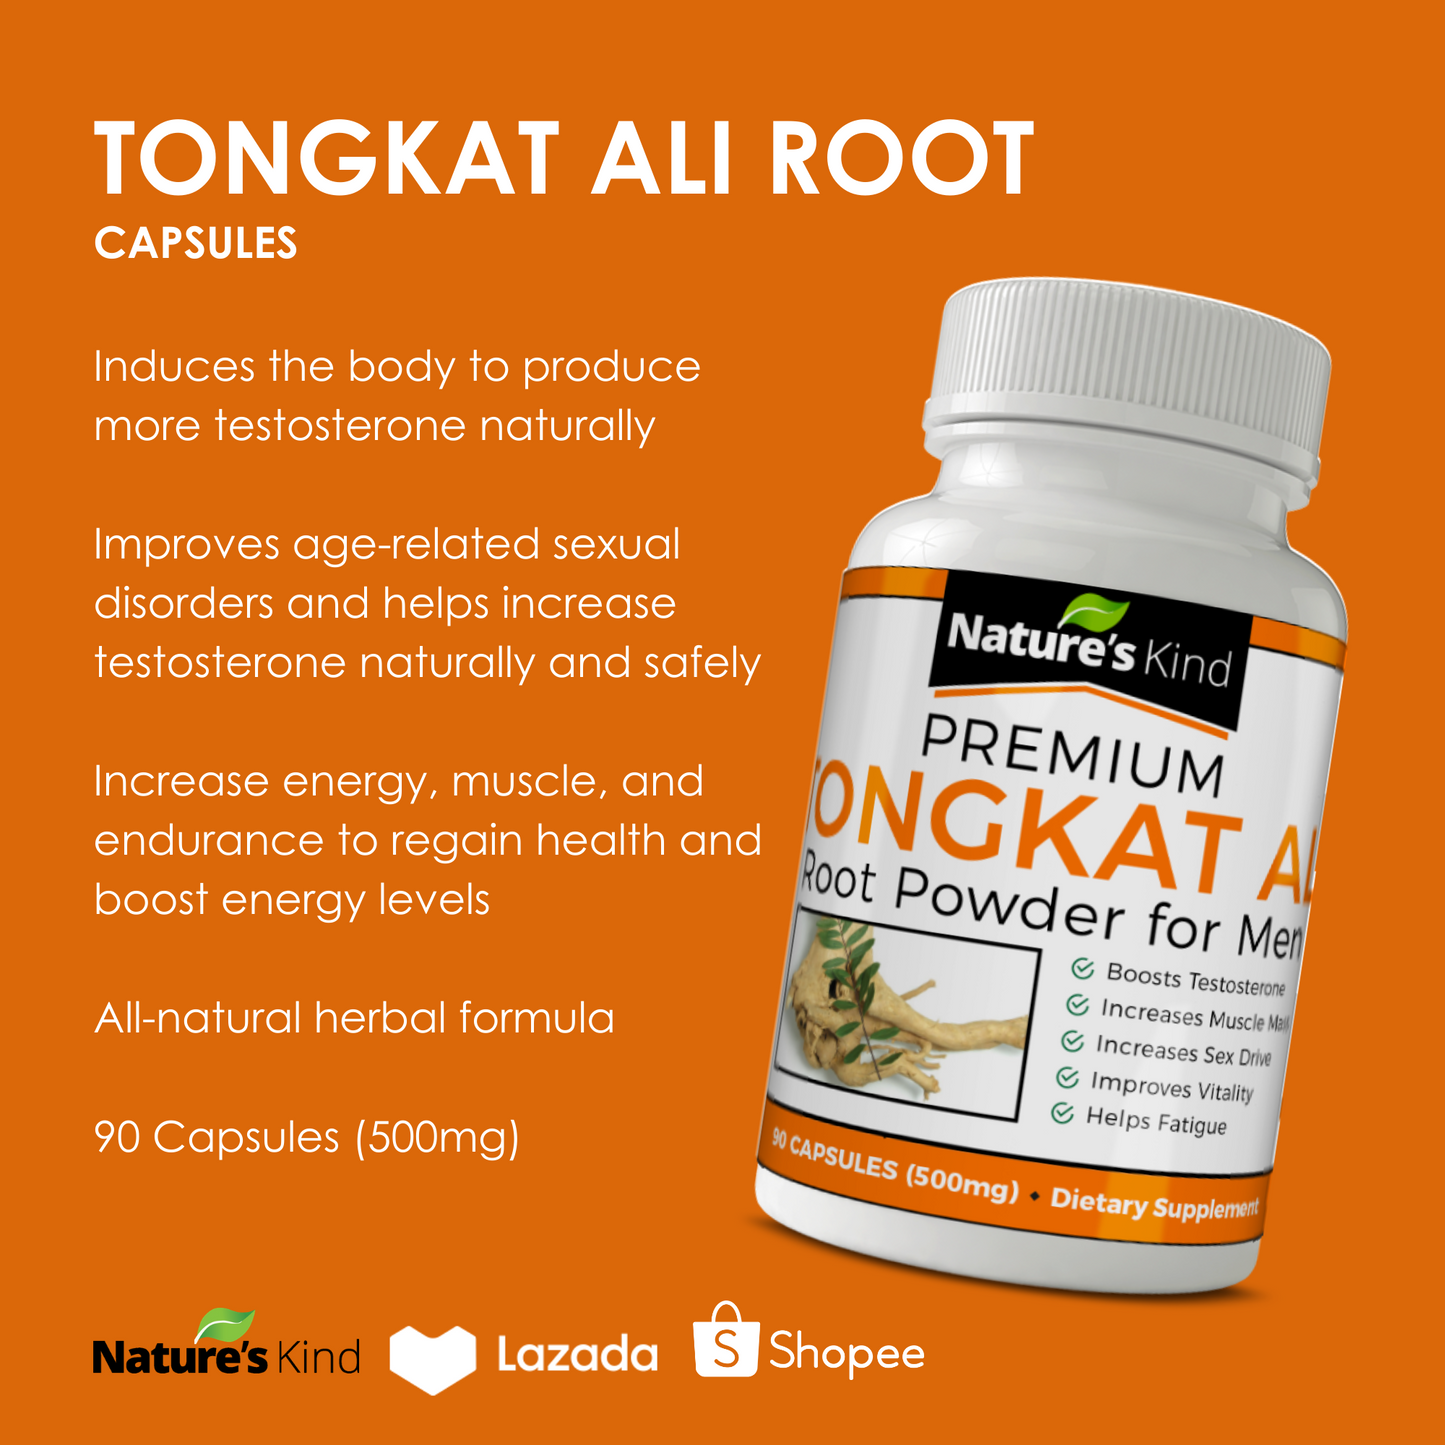 Tongkat Ali Root Capsules - Nature's Best Testosterone Booster and Most Potent Aphrodisiac